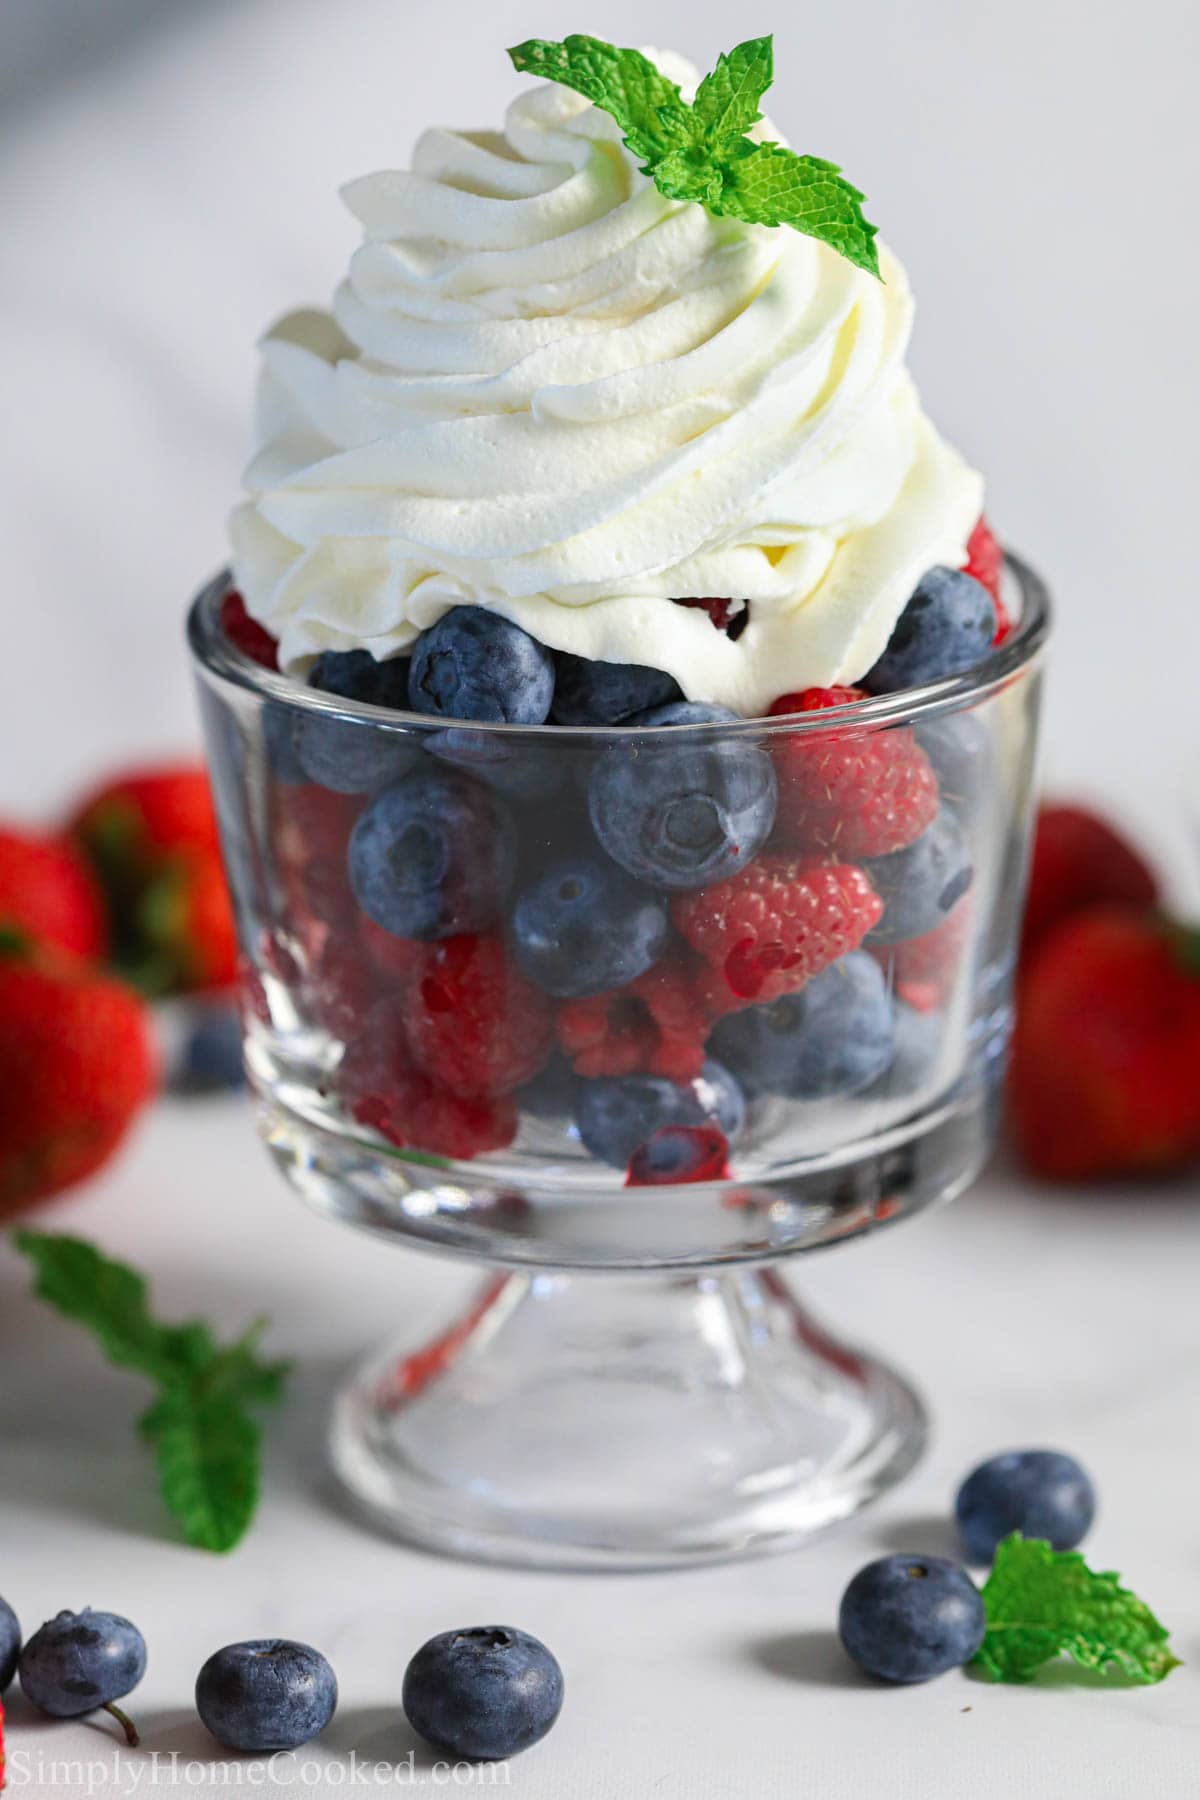 Vertical image of cup of fresh berries with Chantilly Cream on top